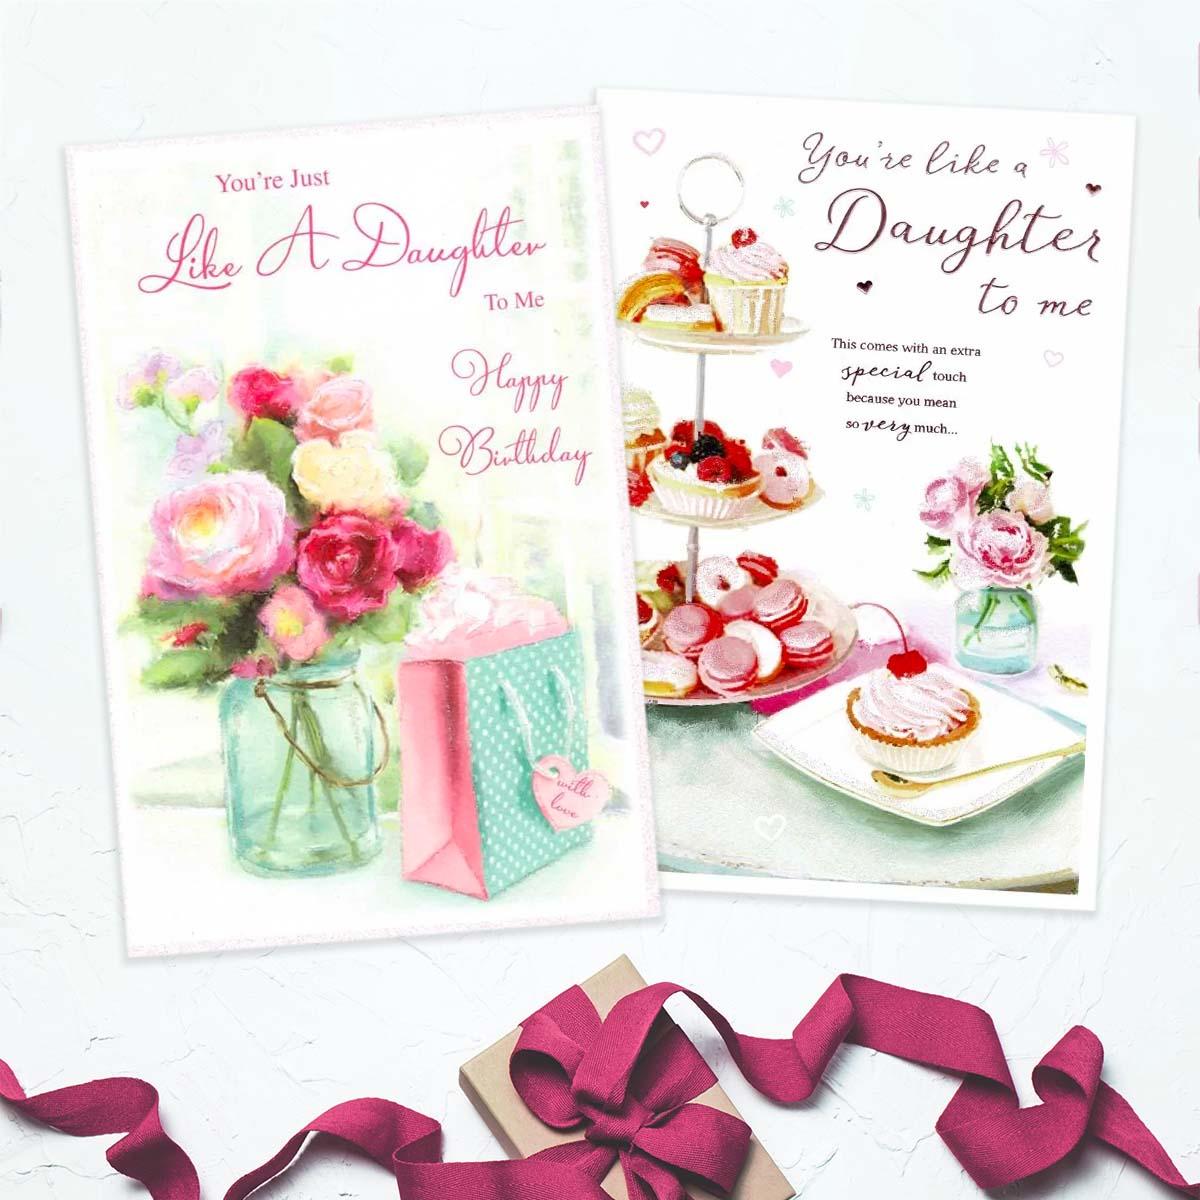 A Selection Of Cards To Show The Depth Of Range In Our Like Our Daughter Section